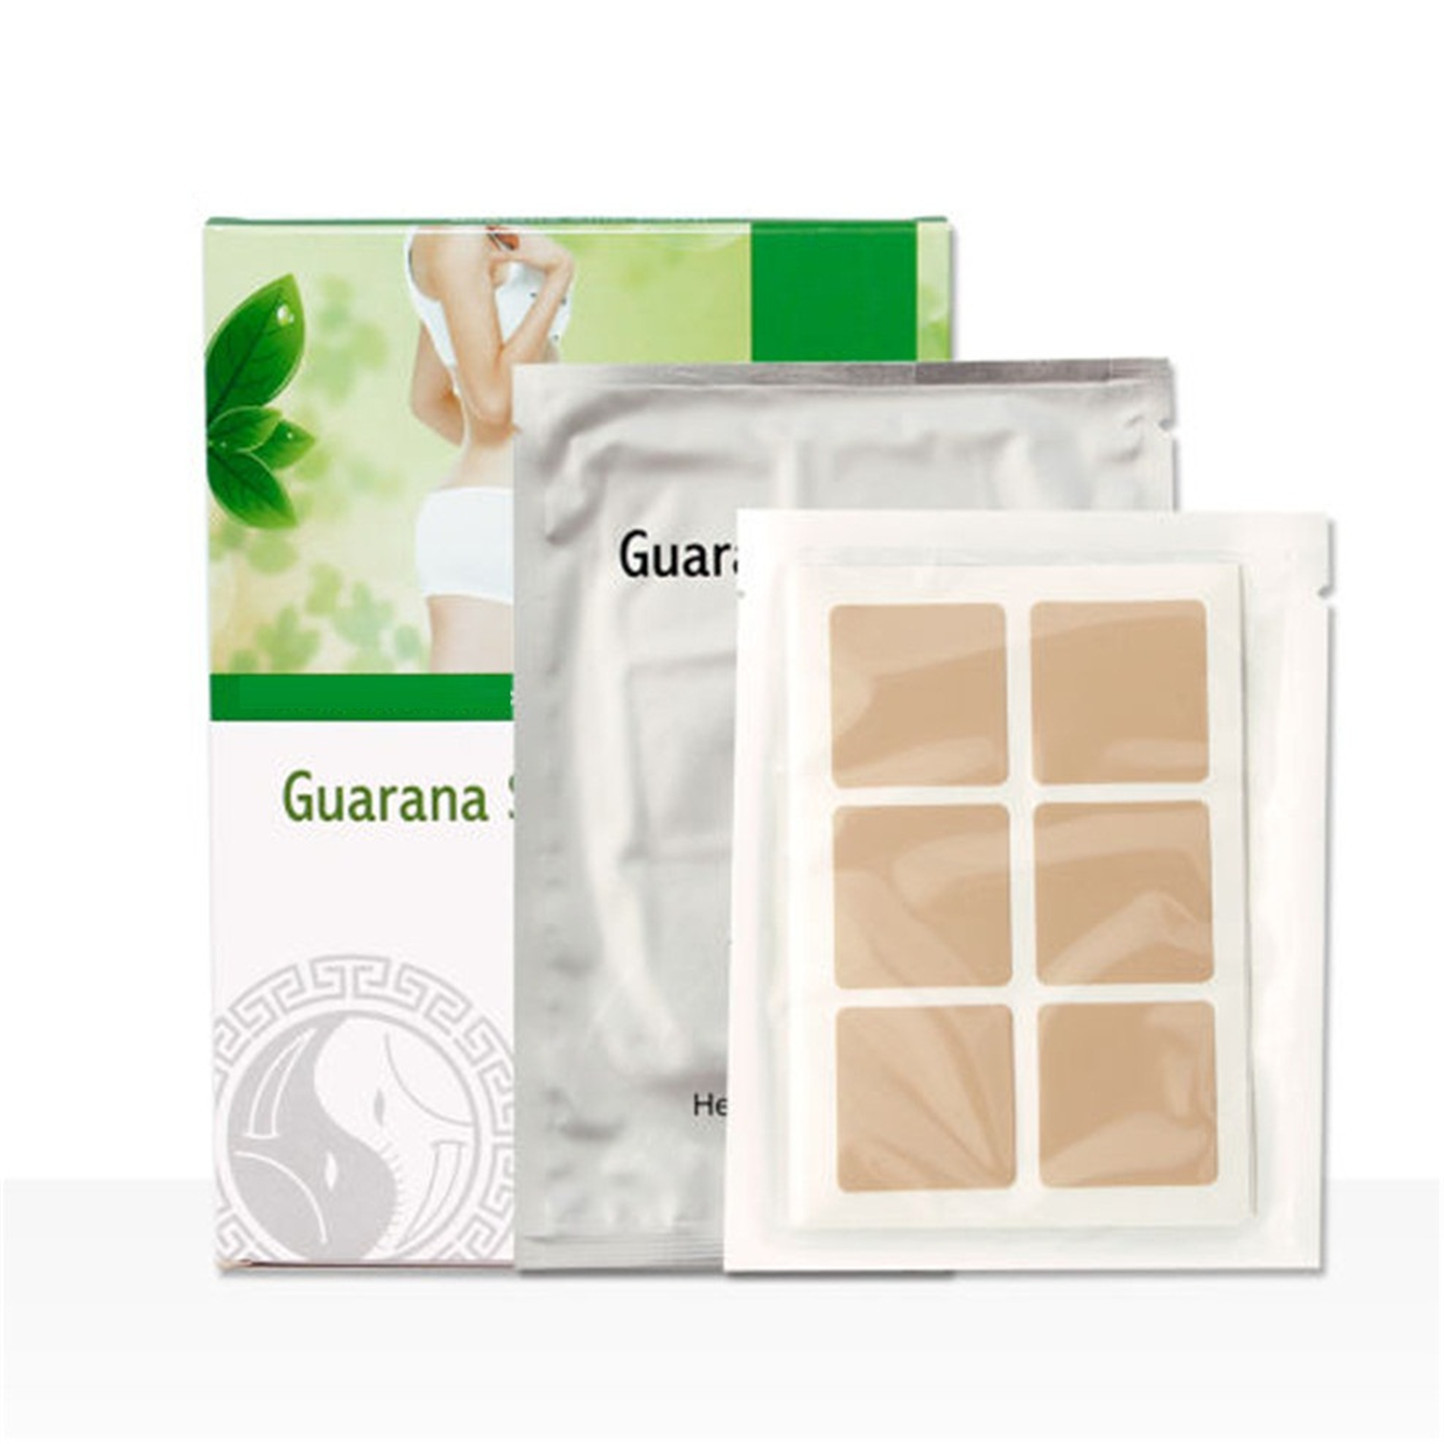 Wholesale Healthy and Safe Herbal Guarana Extract original slimming detox wonder patches from china suppliers